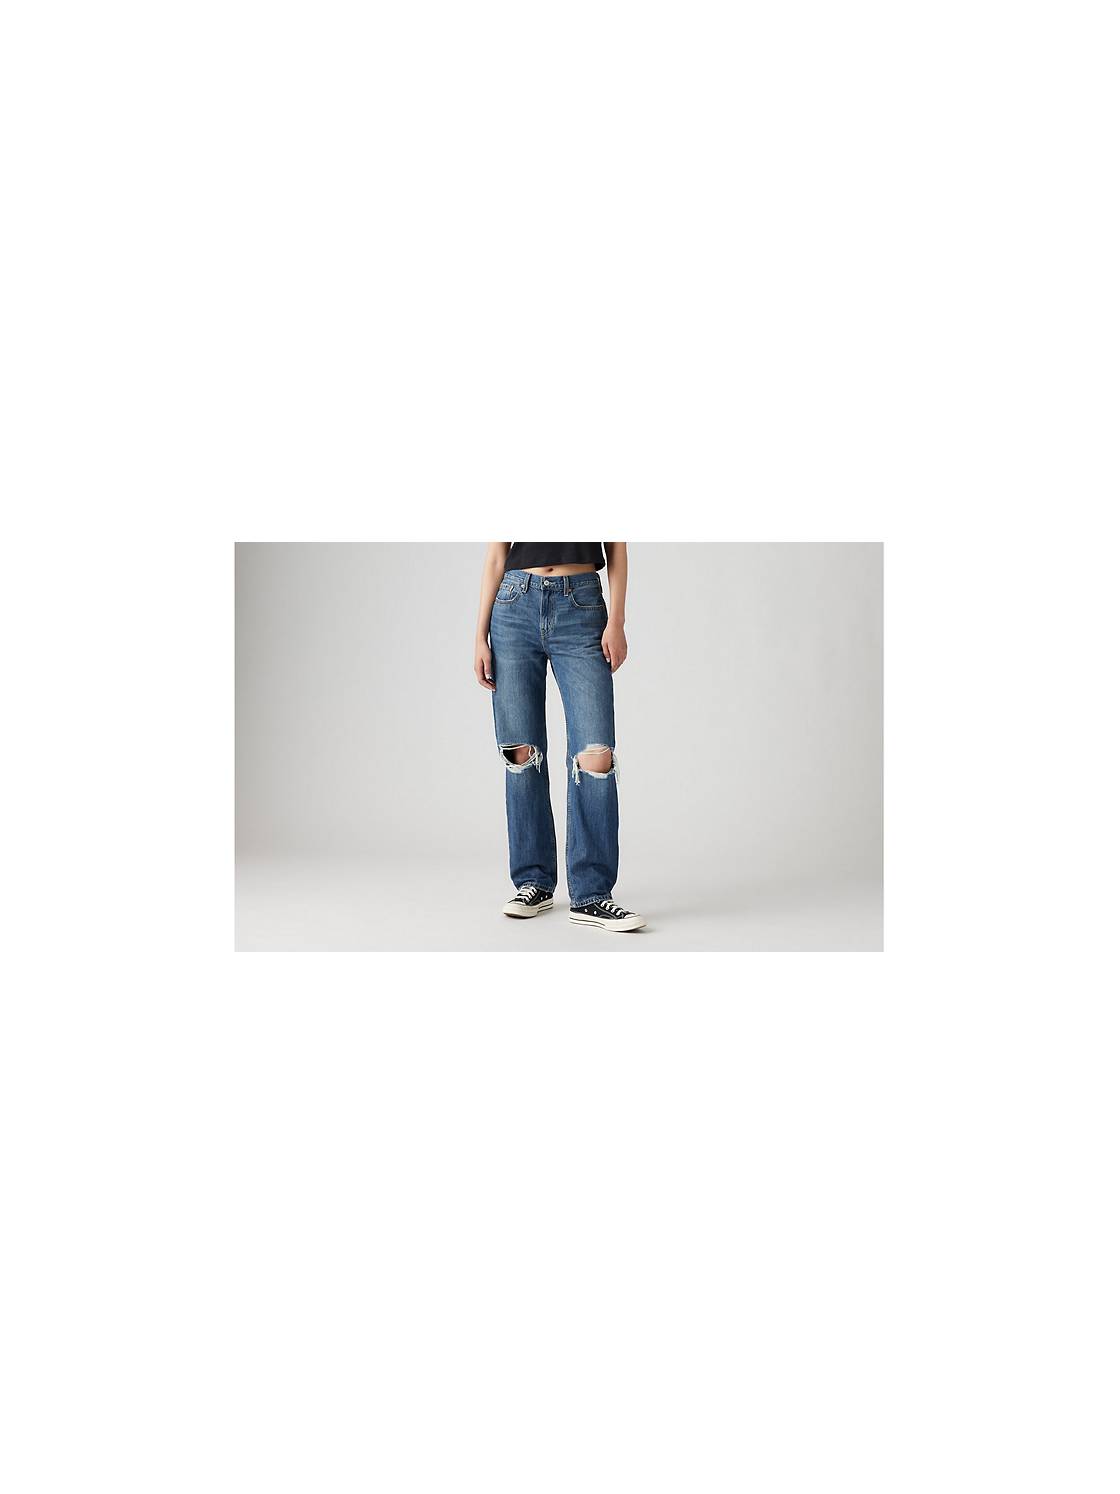 Ripped Jeans - Distressed Jeans - Ripped & Distressed Jeans for Women